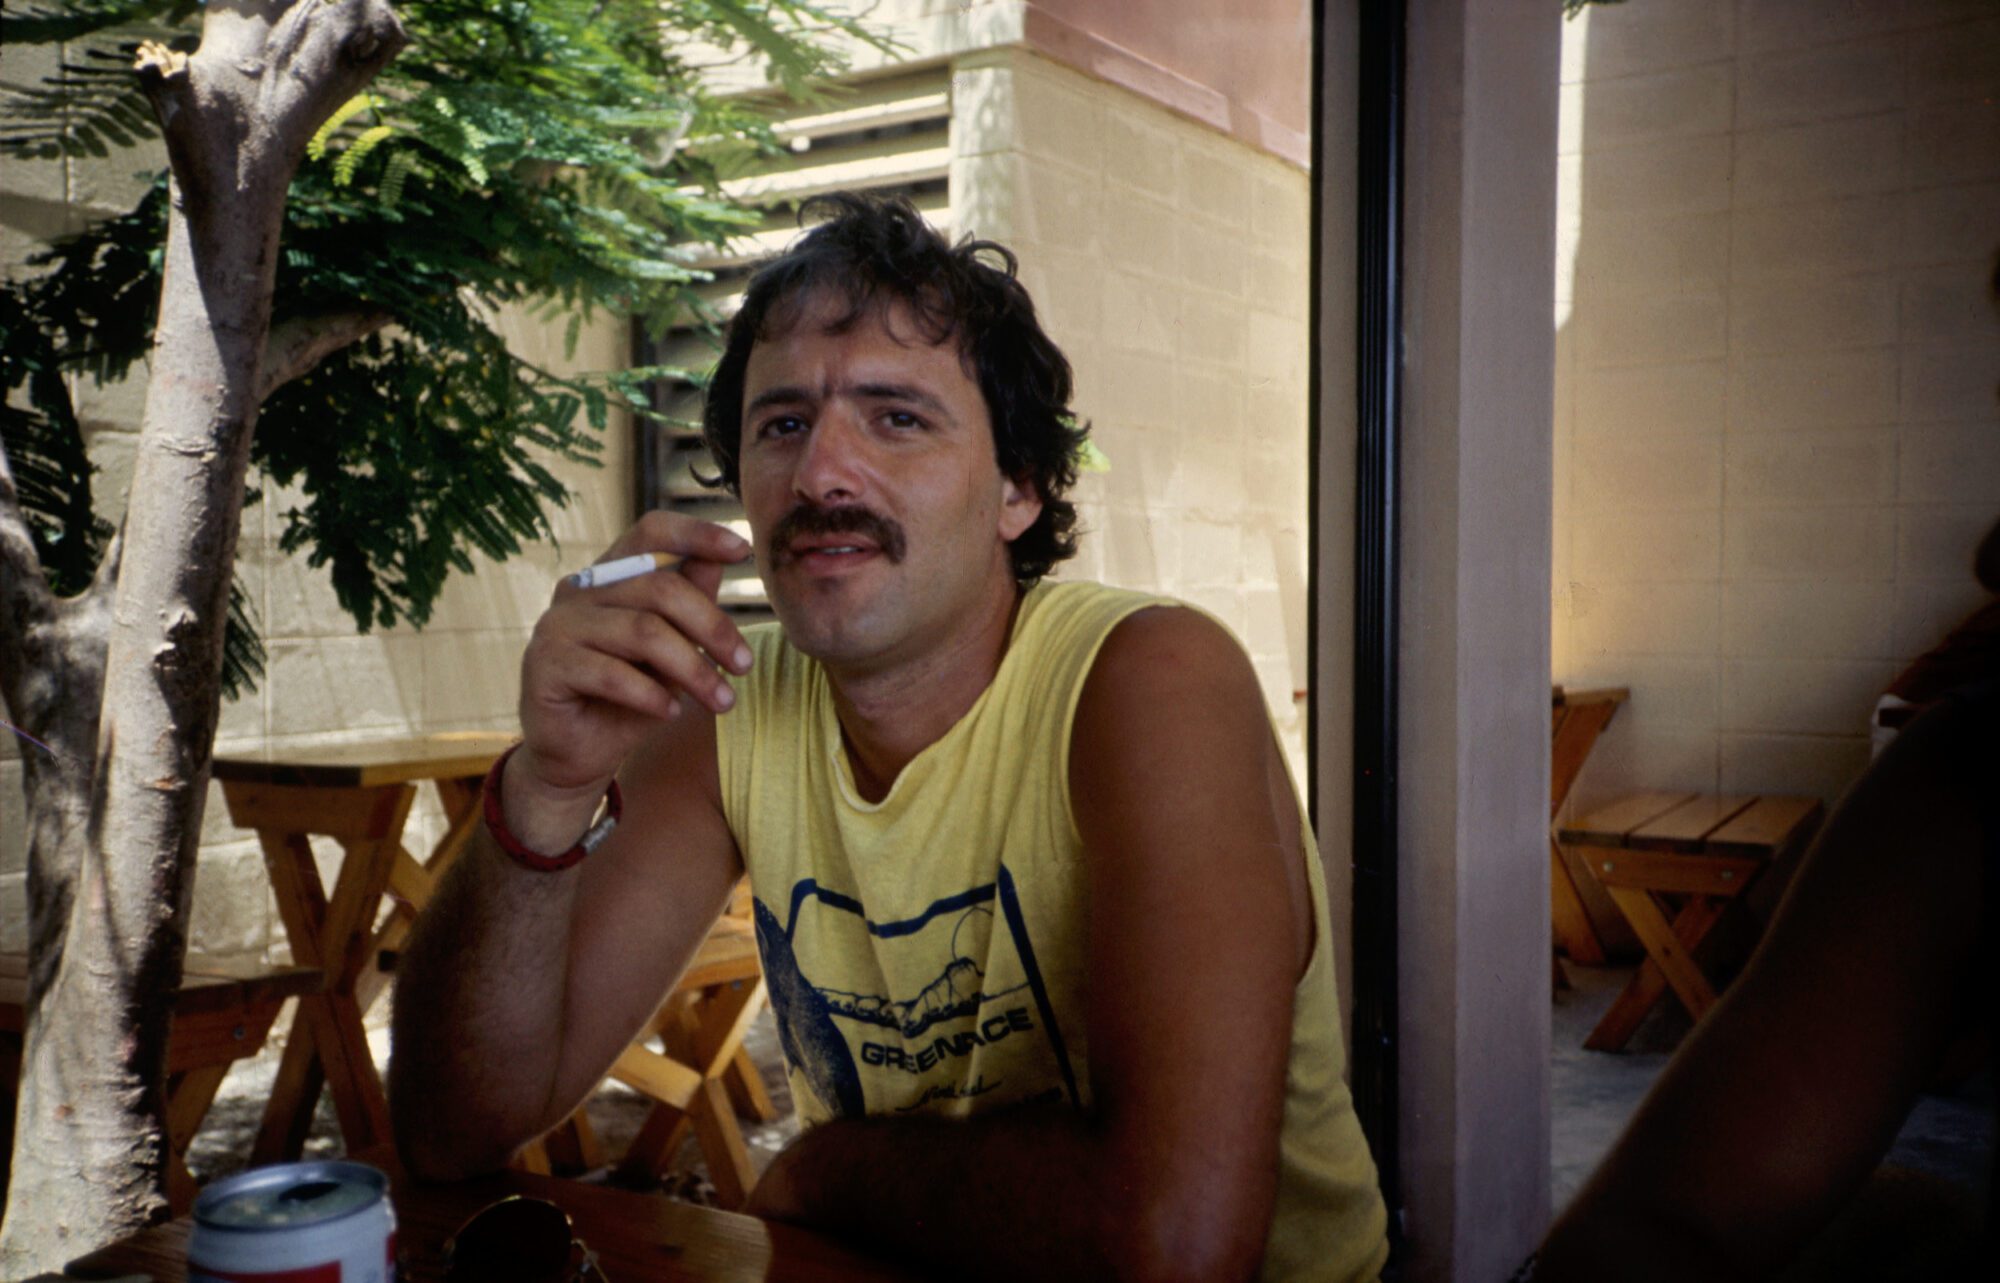 Fernando Pereira wearing a yellow vest, smoking a cigarette. He's looking into the camera with a relaxed expression.